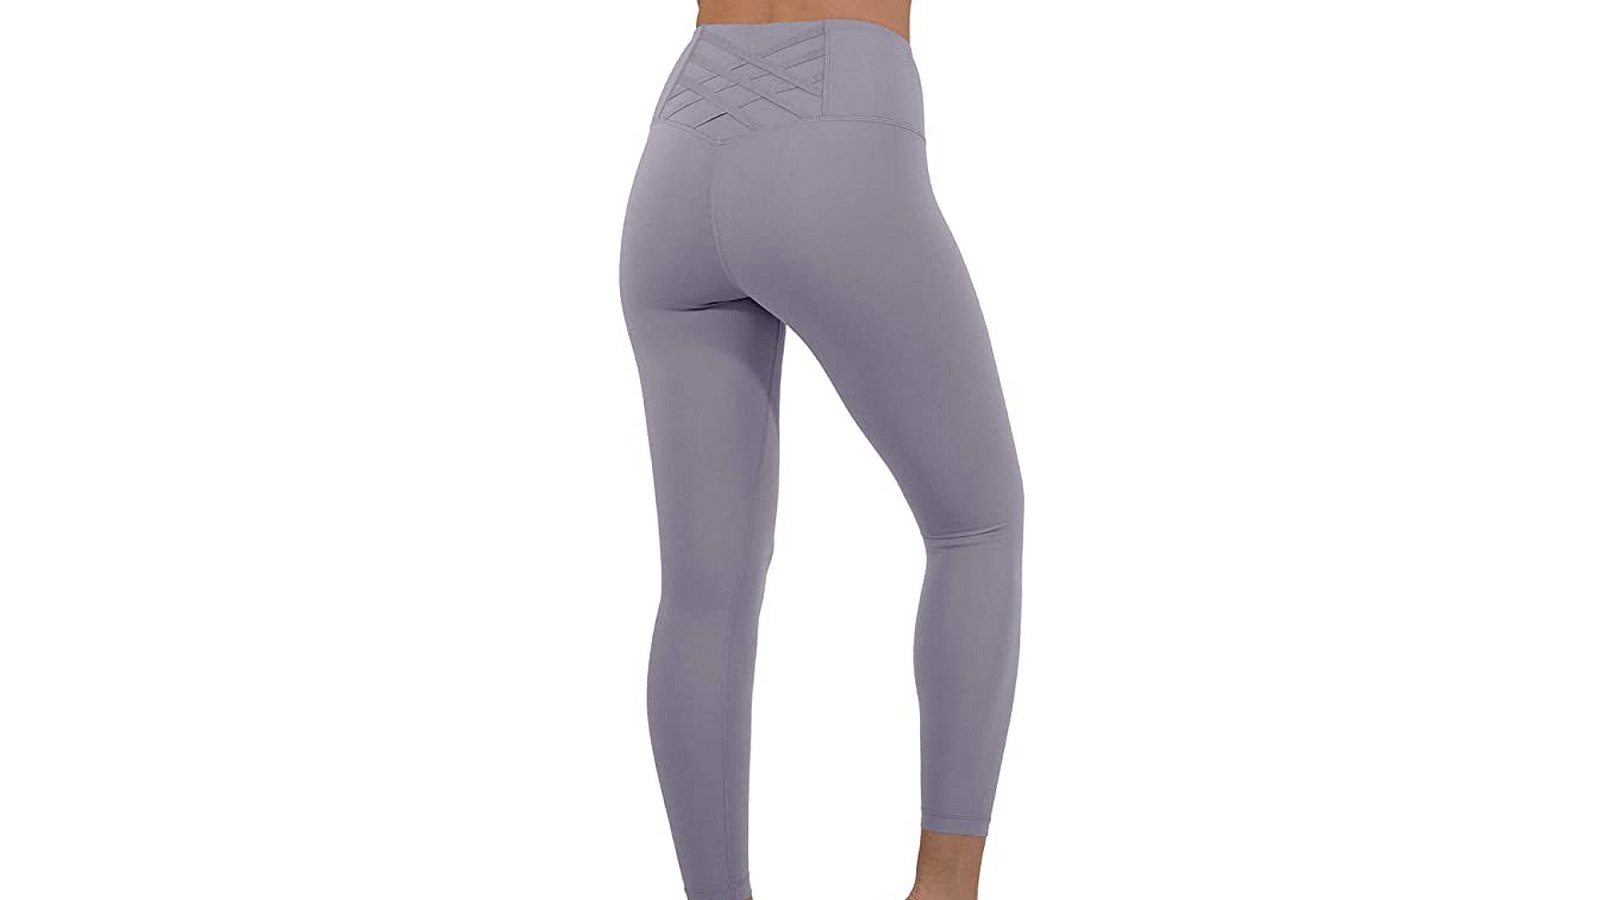 Yogalicious Leggings Have the Most Flattering Criss-Cross Design